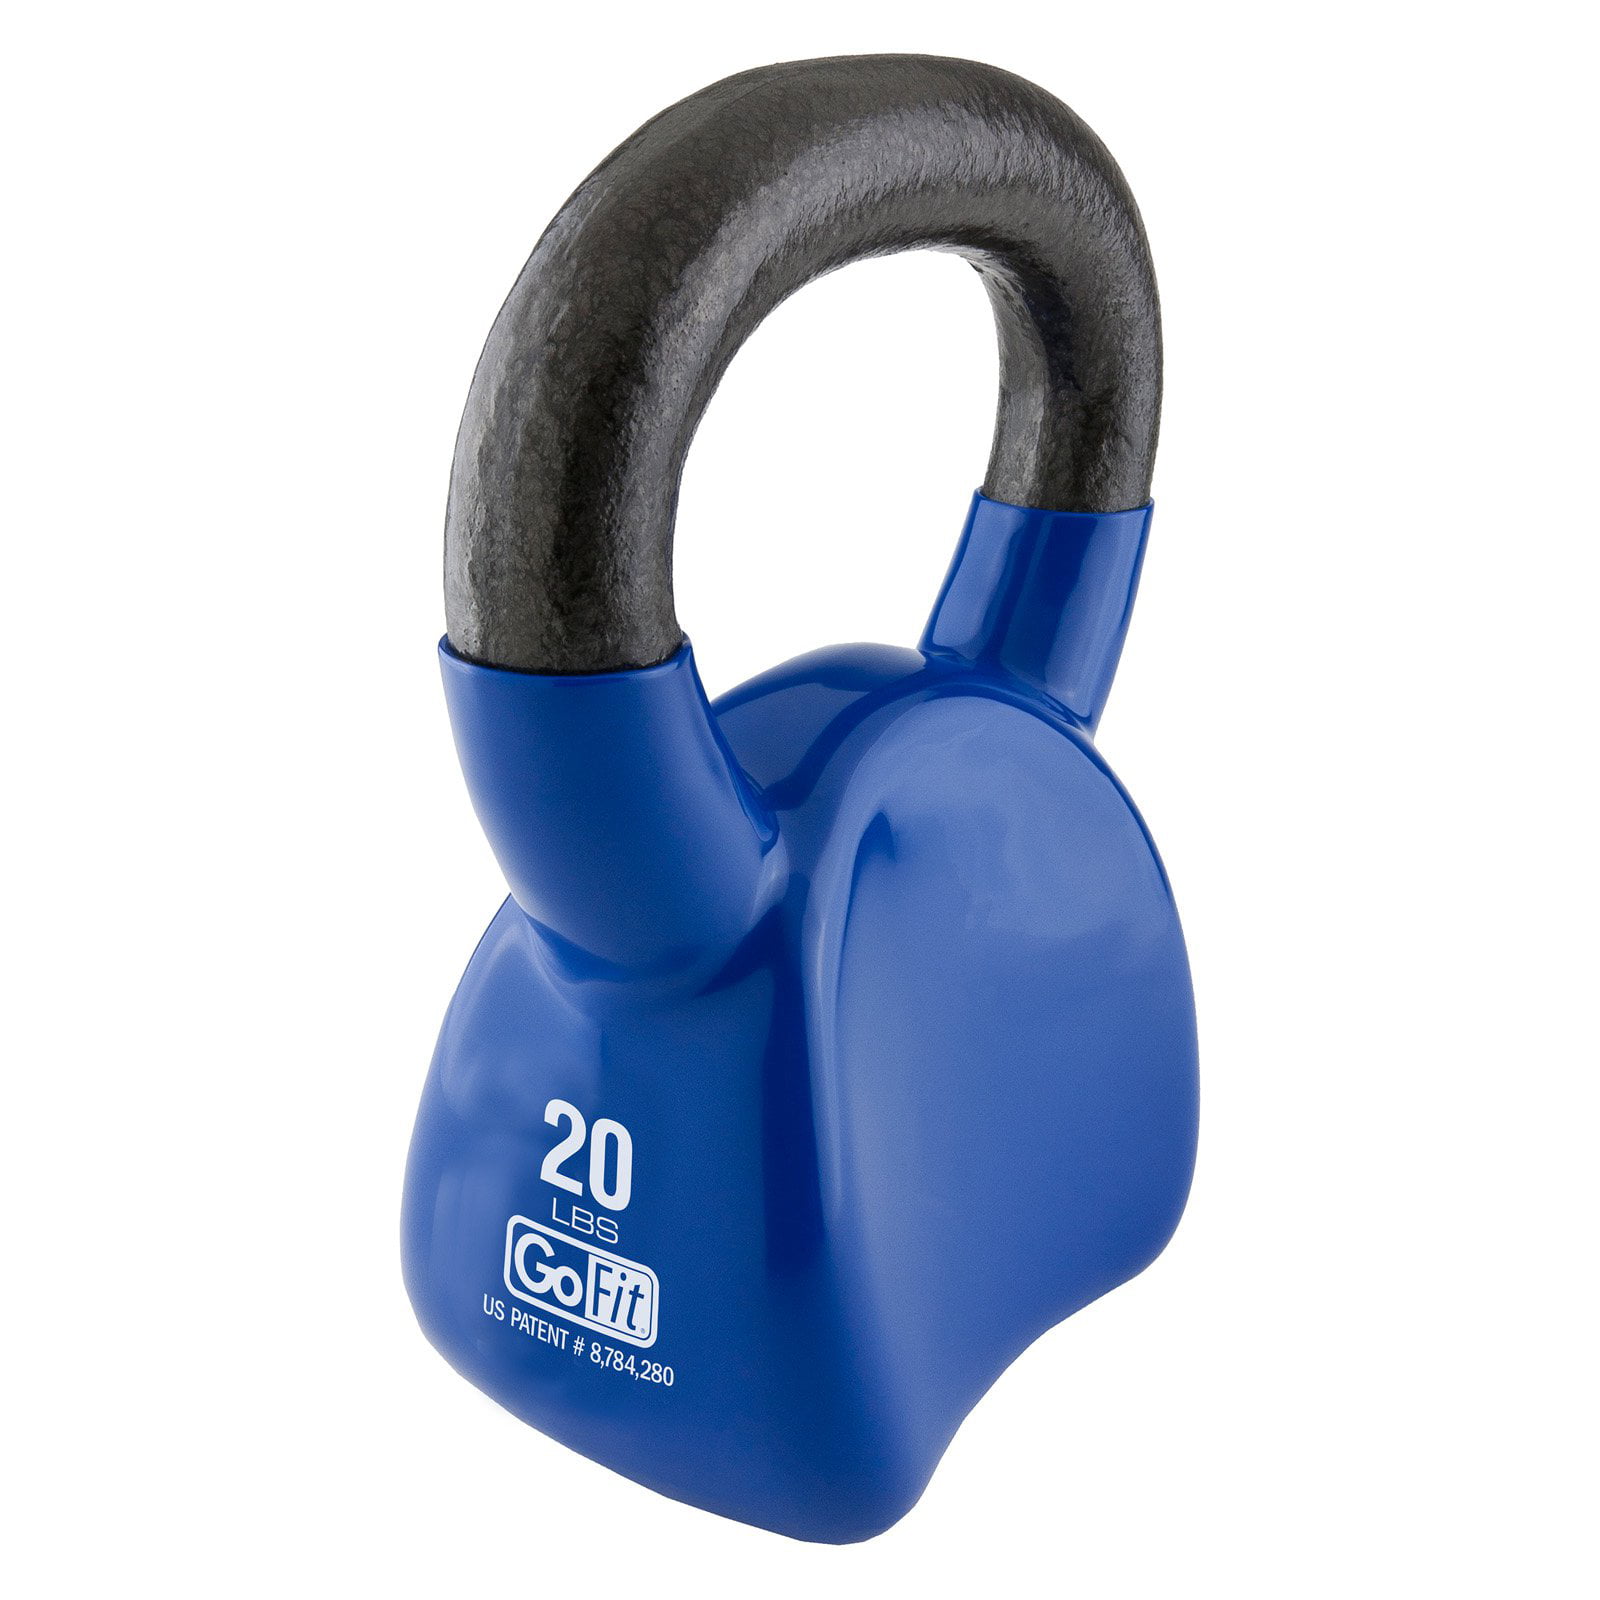 Gym and CrossFit Workouts GoFit Contour Kettlebell Vinyl Coated Premium Kettle bell Home for Exercise